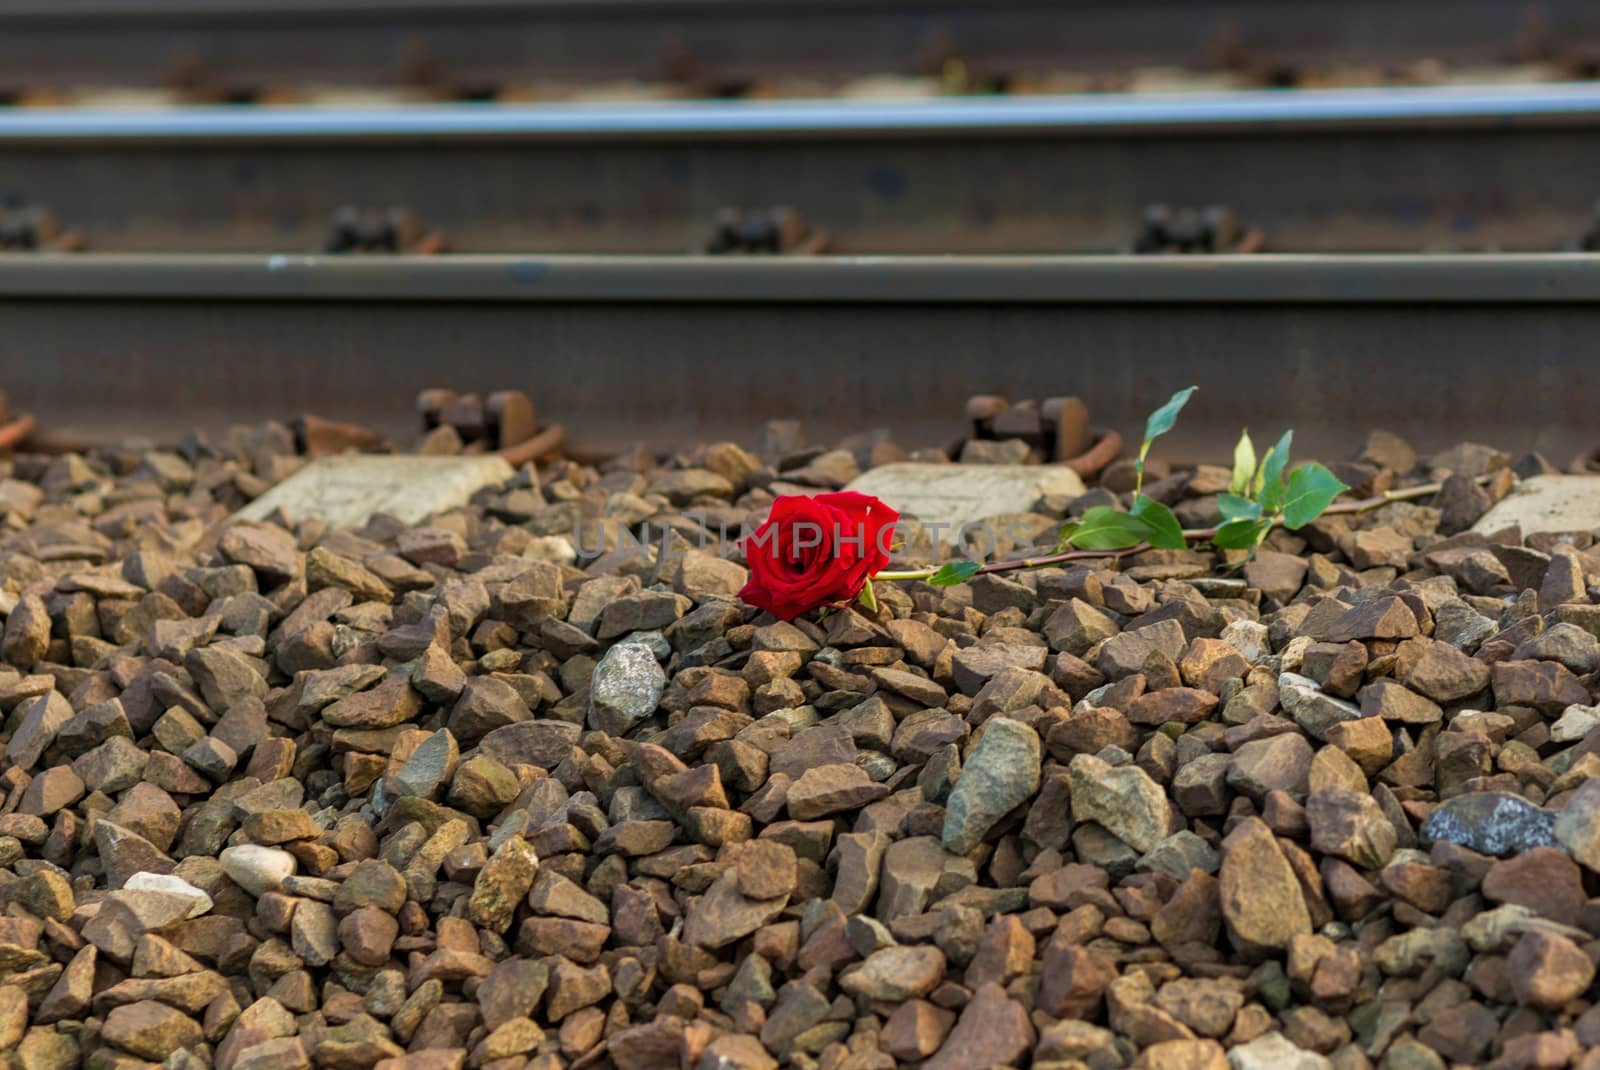 Red rose lies next to the rails on the train tracks